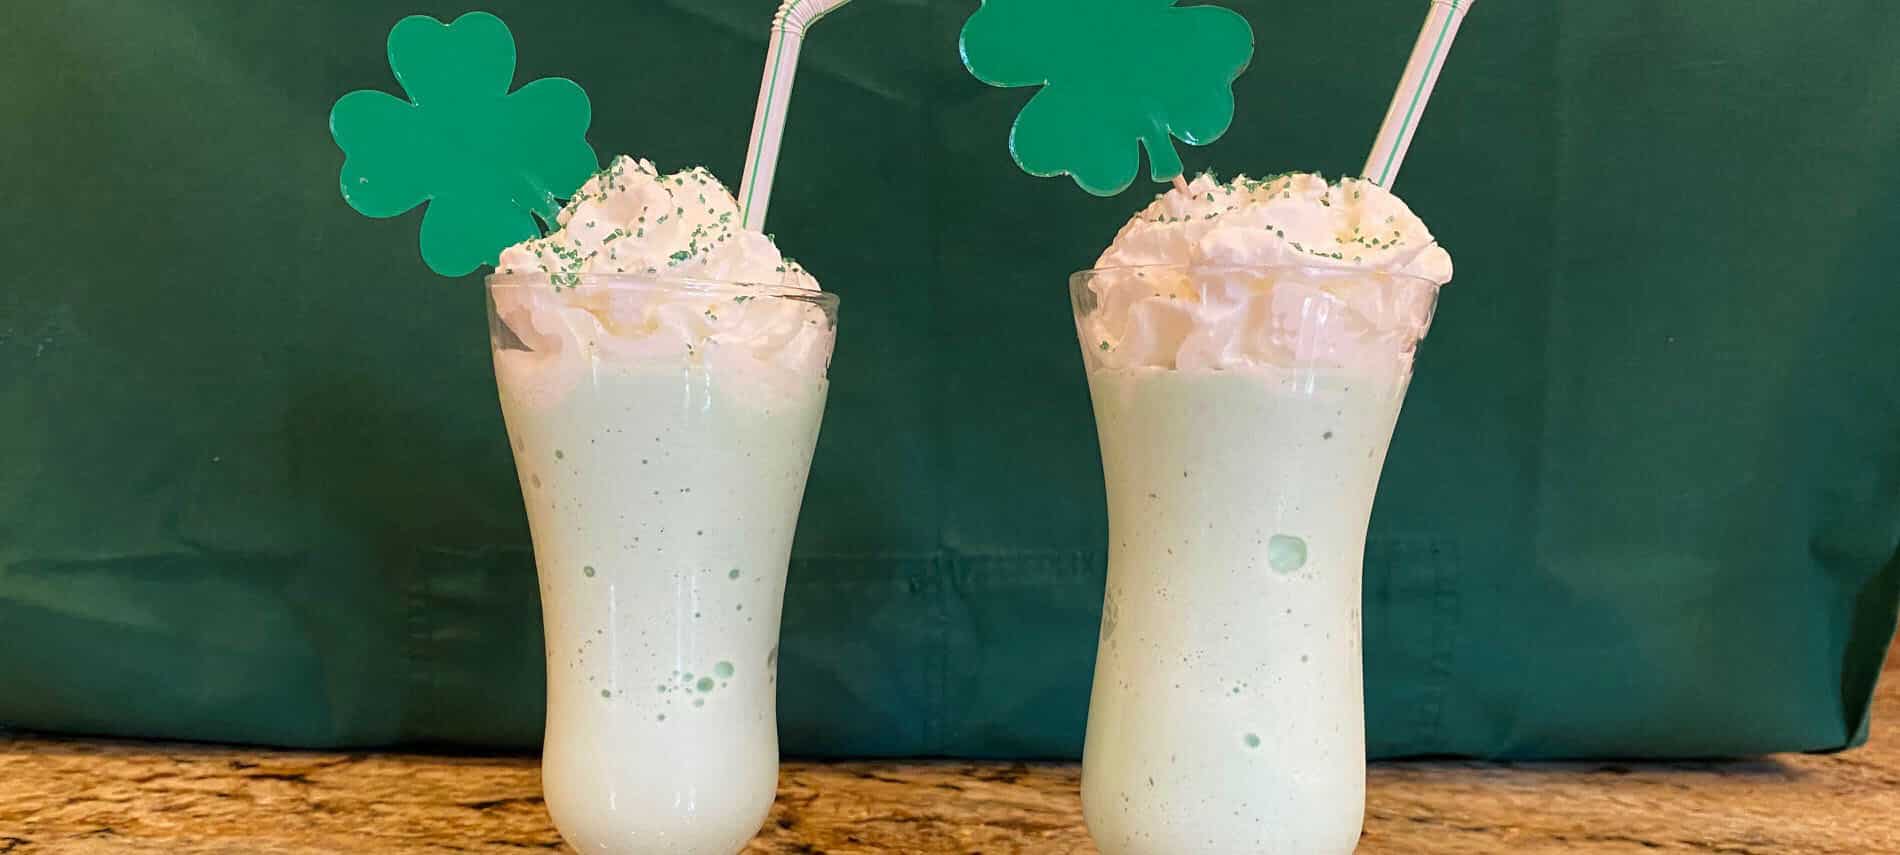 green milkshake with whipped topping and shamrocks in front of a green background